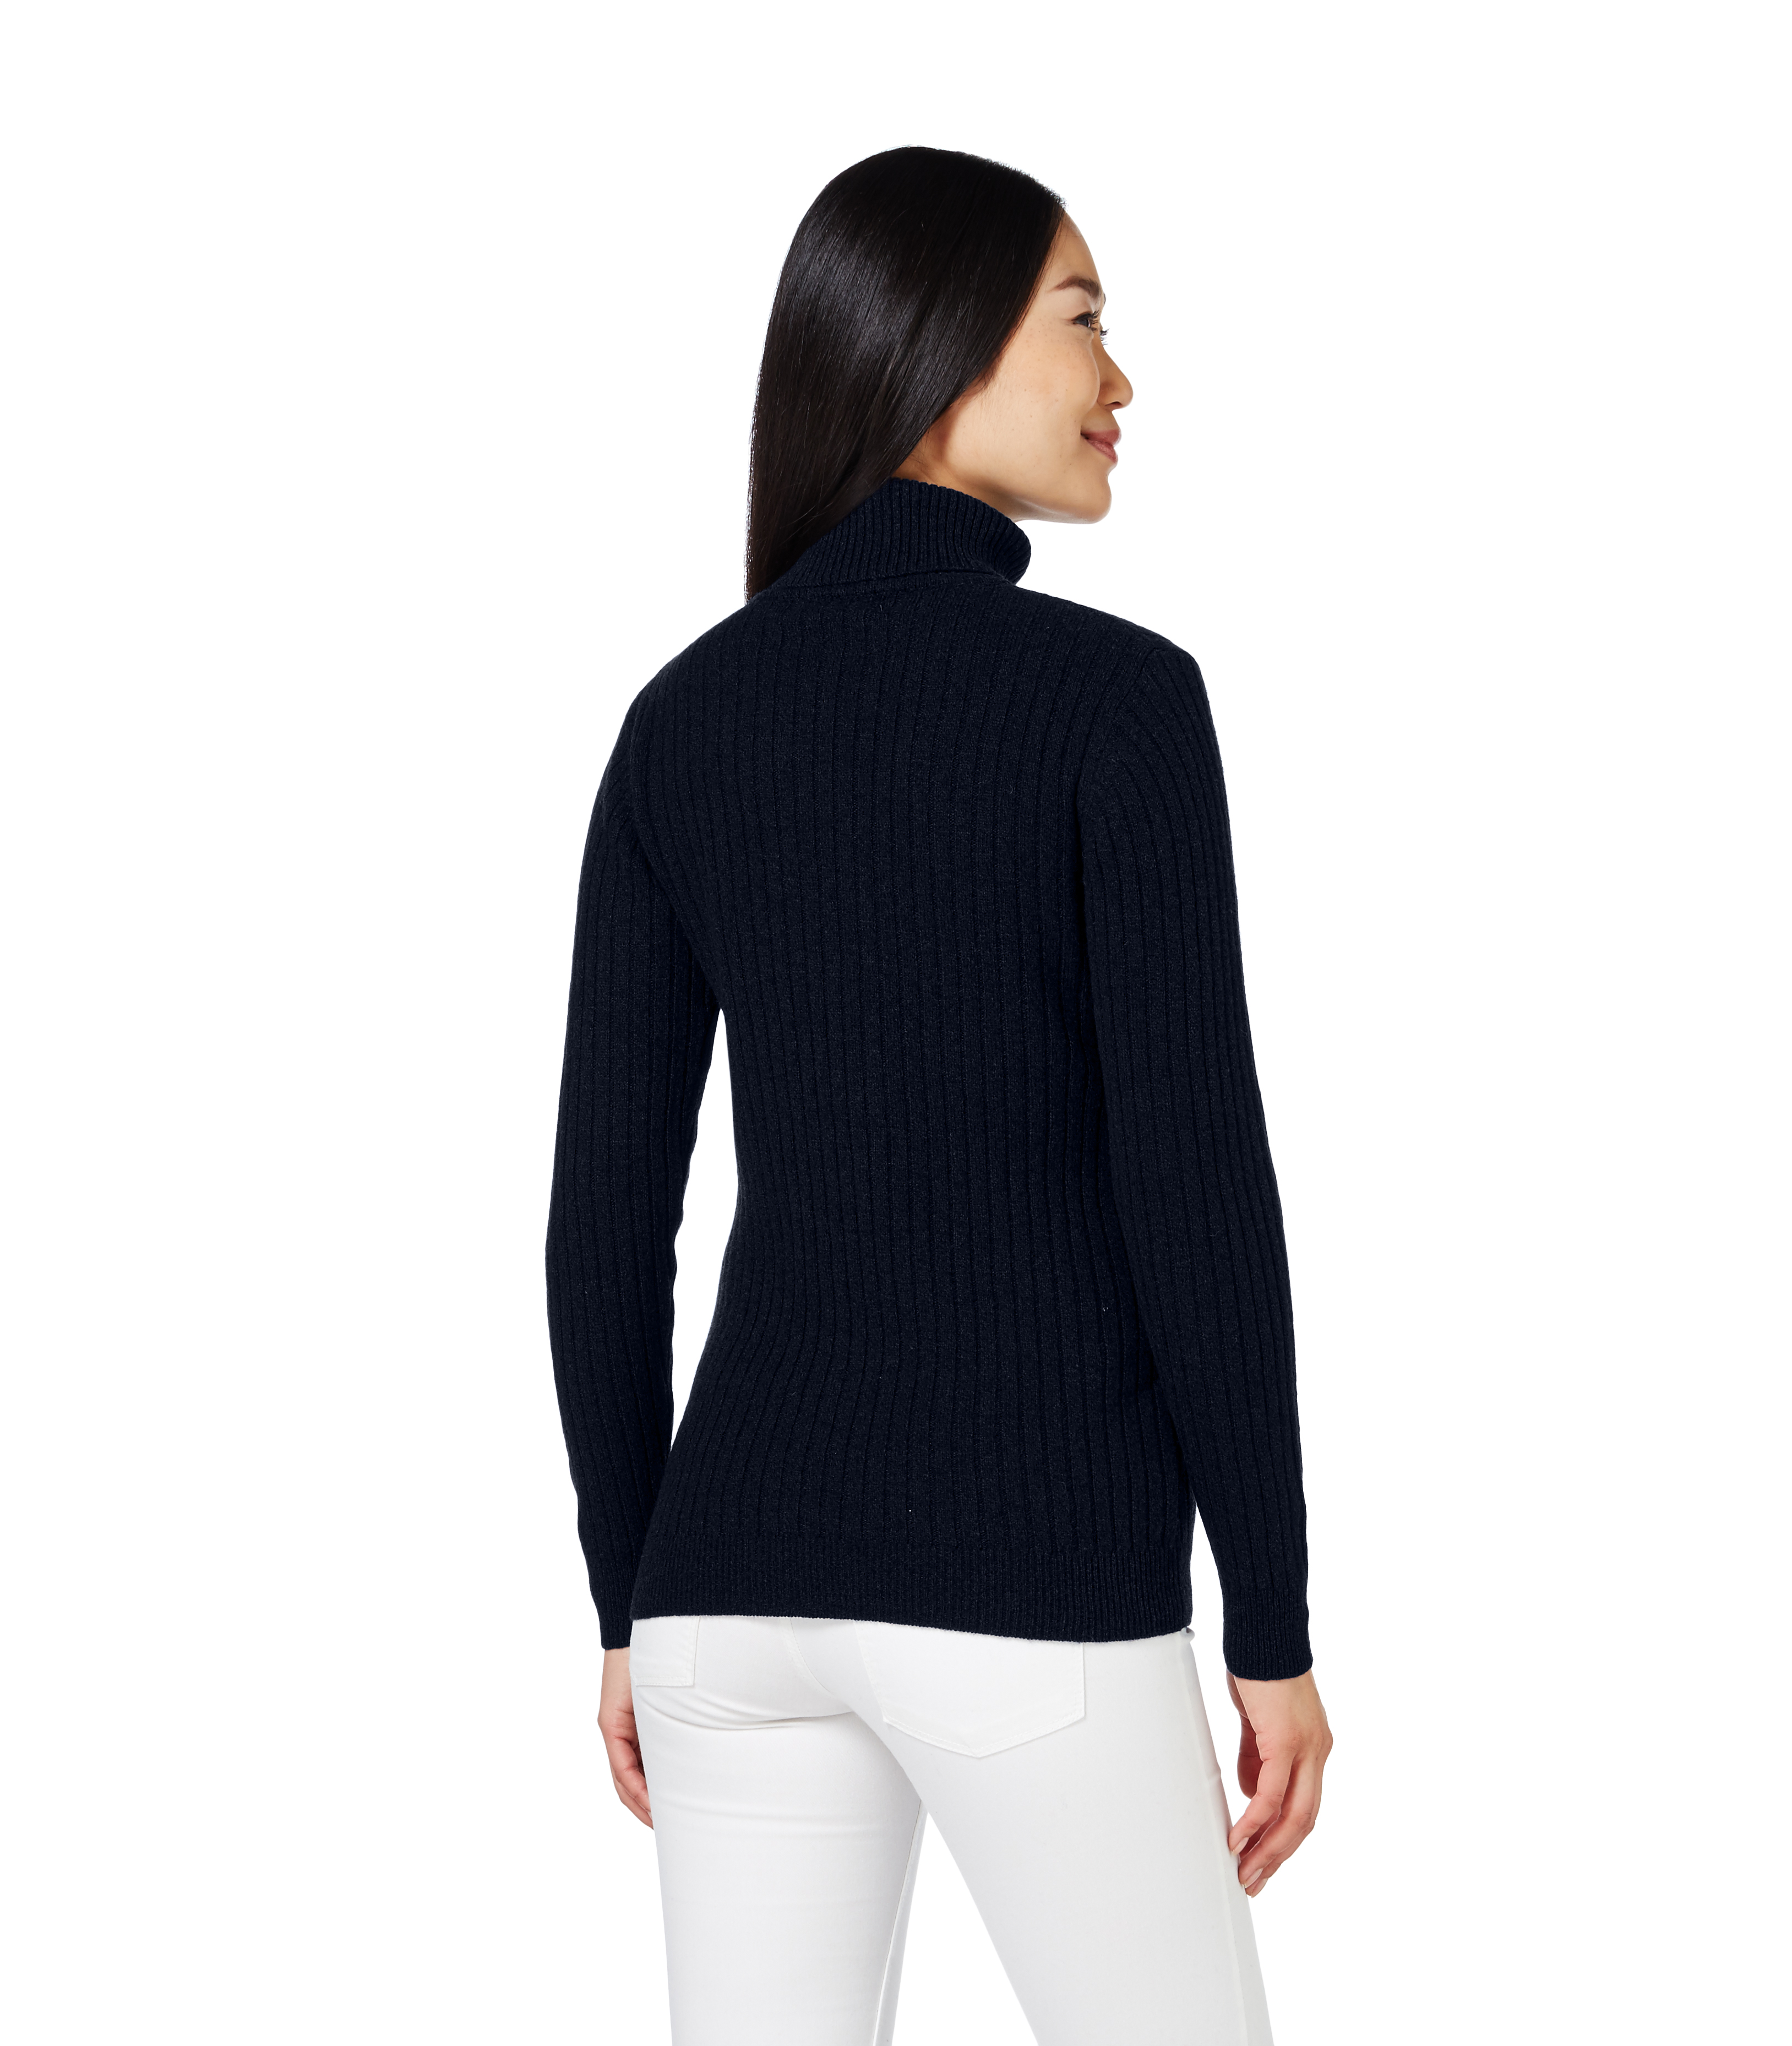 Black lambswool polo neck jumper